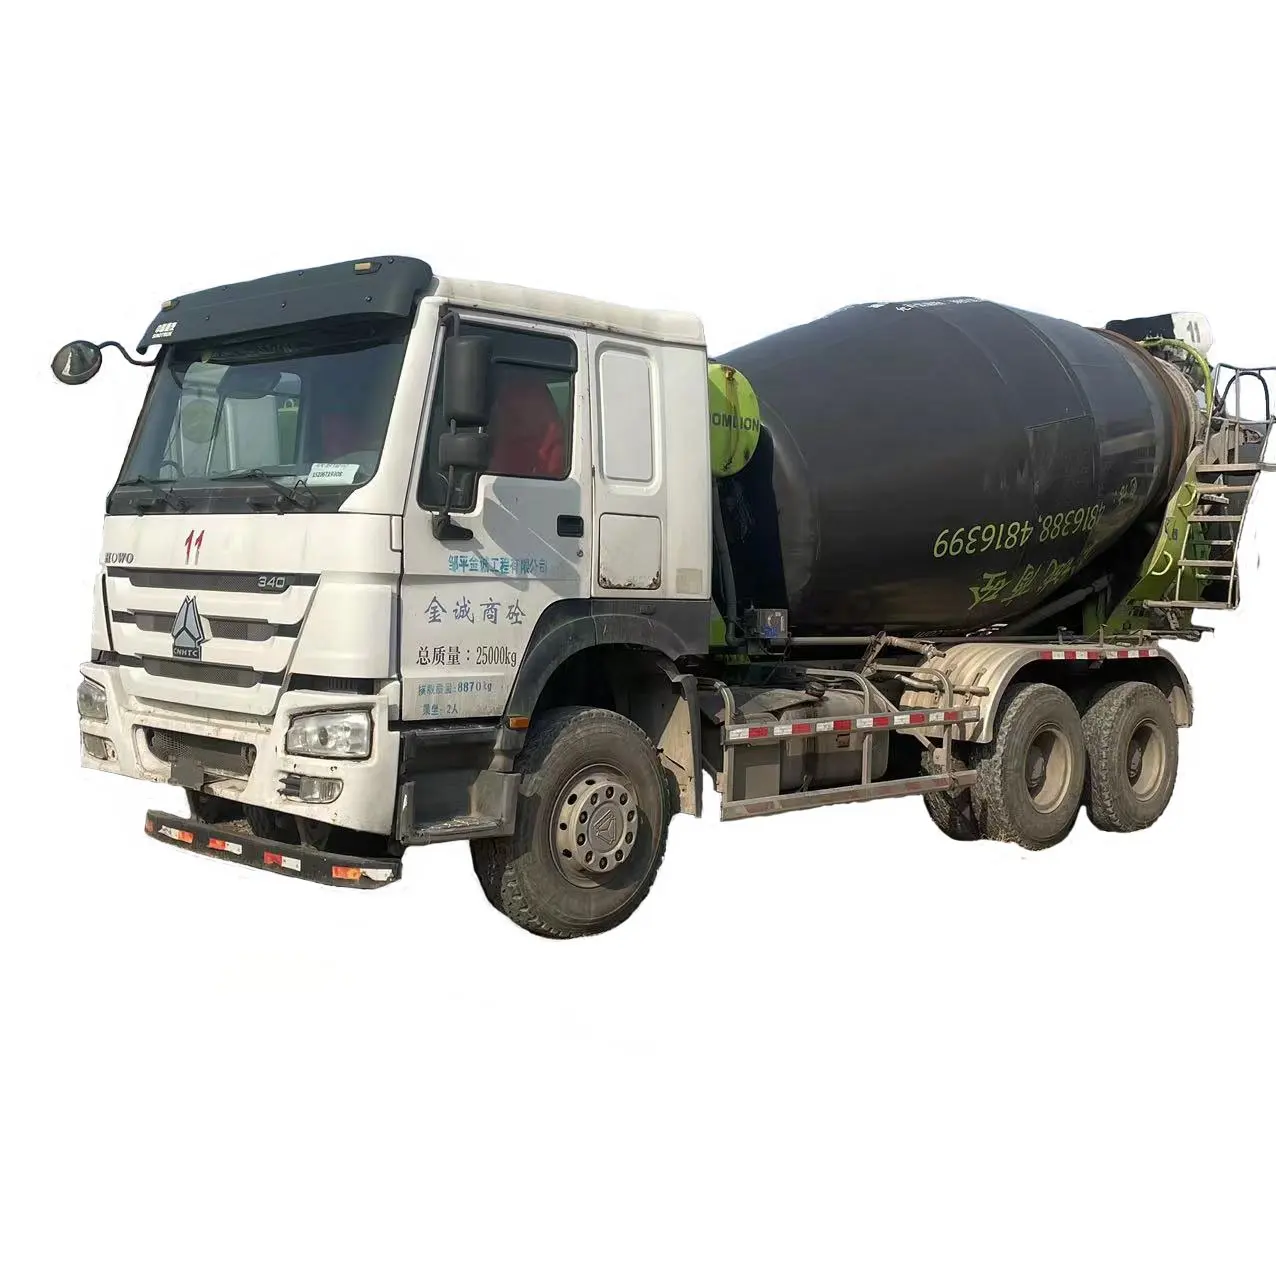 Good Condition Second Hand Used Sinotruck concrete mixer truck with cheap price